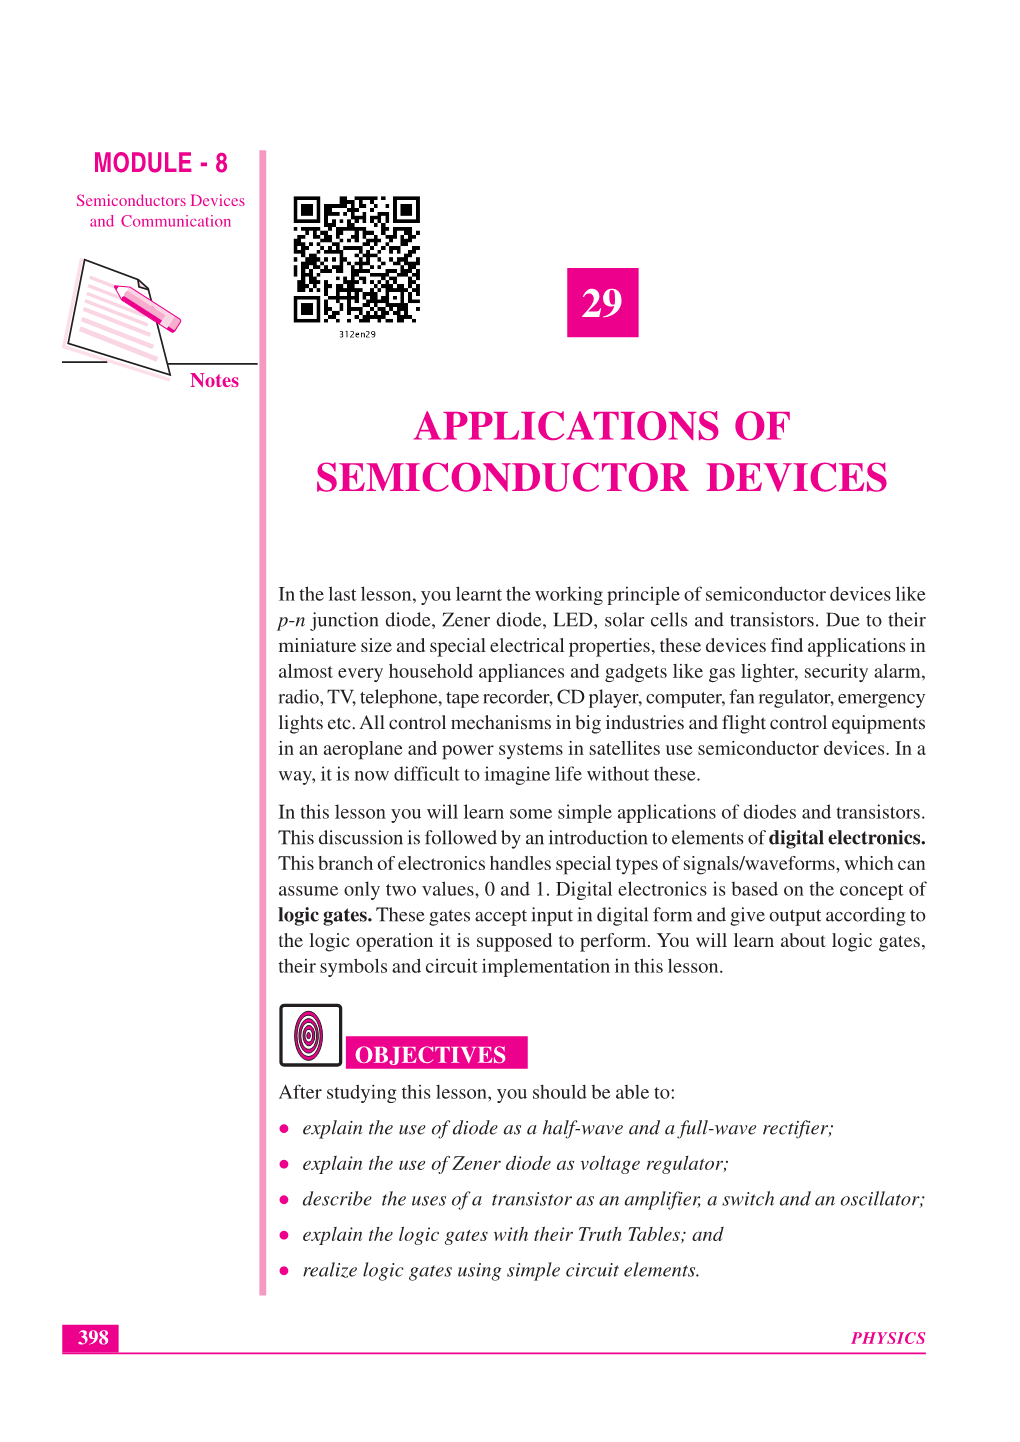 29 Applications of Semiconductor Devices